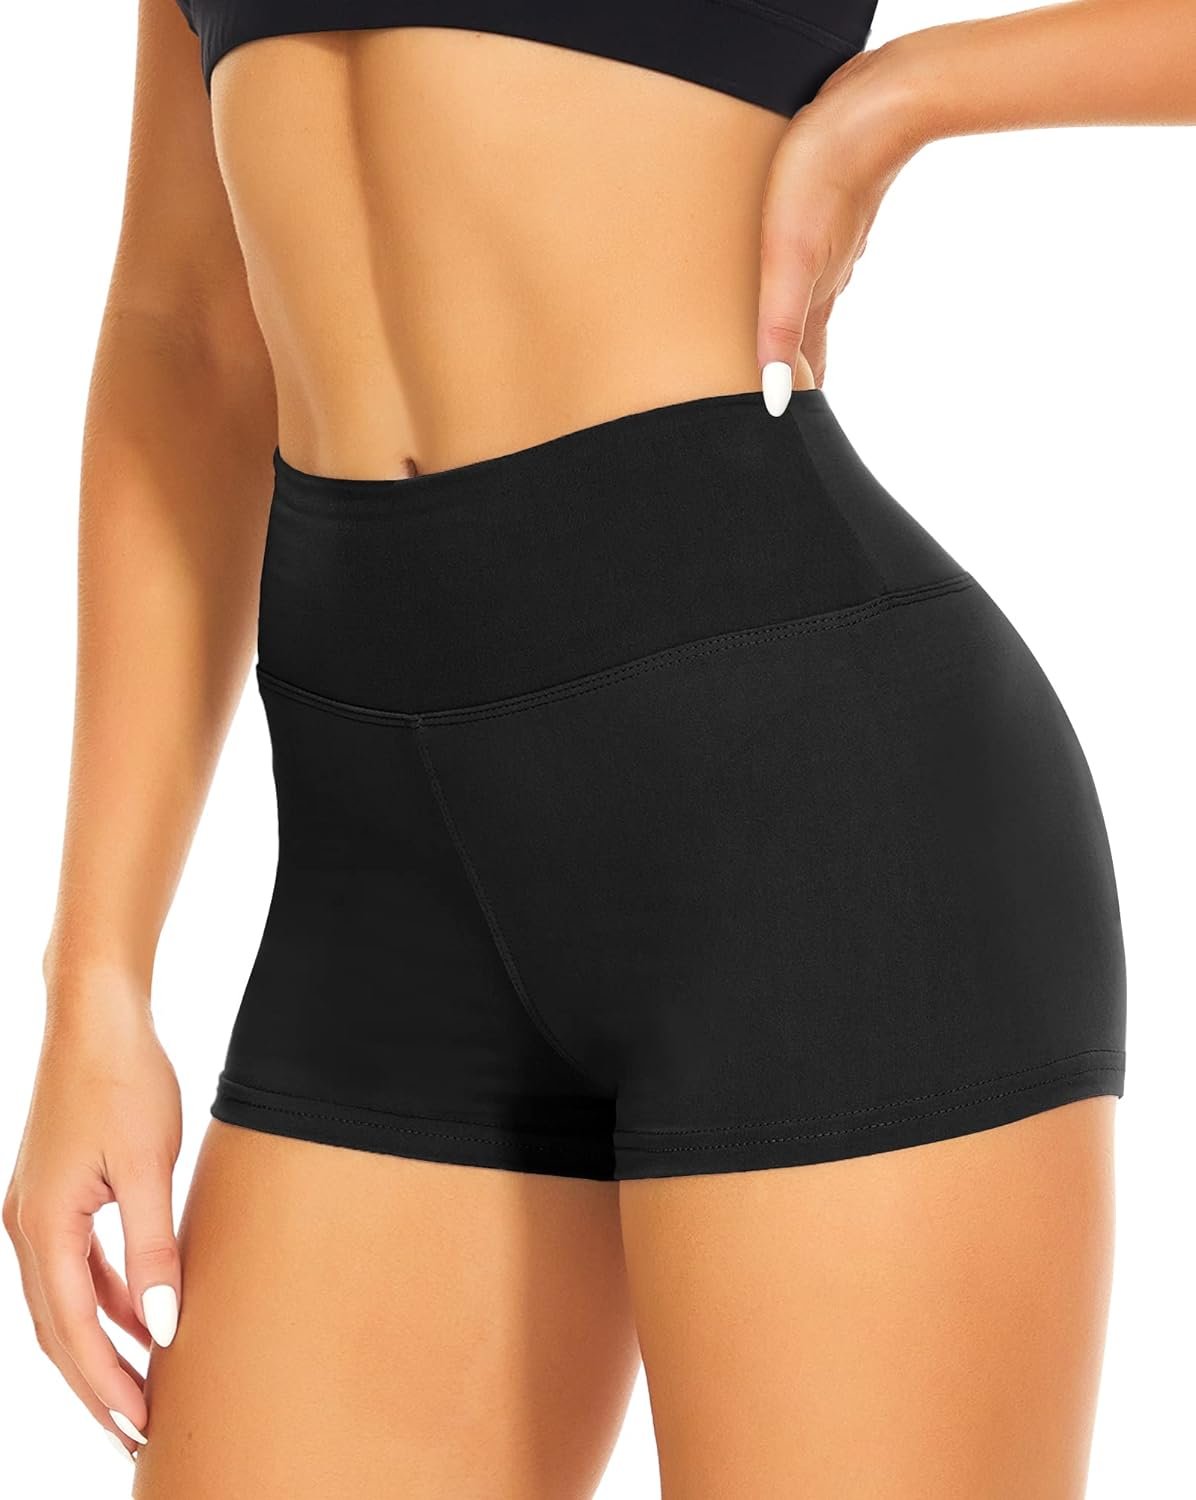 CAMPSNAIL Workout Biker Shorts Women - 3/5/8 High Waisted Tummy Control Spandex Booty Volleyball Shorts for Yoga Dance